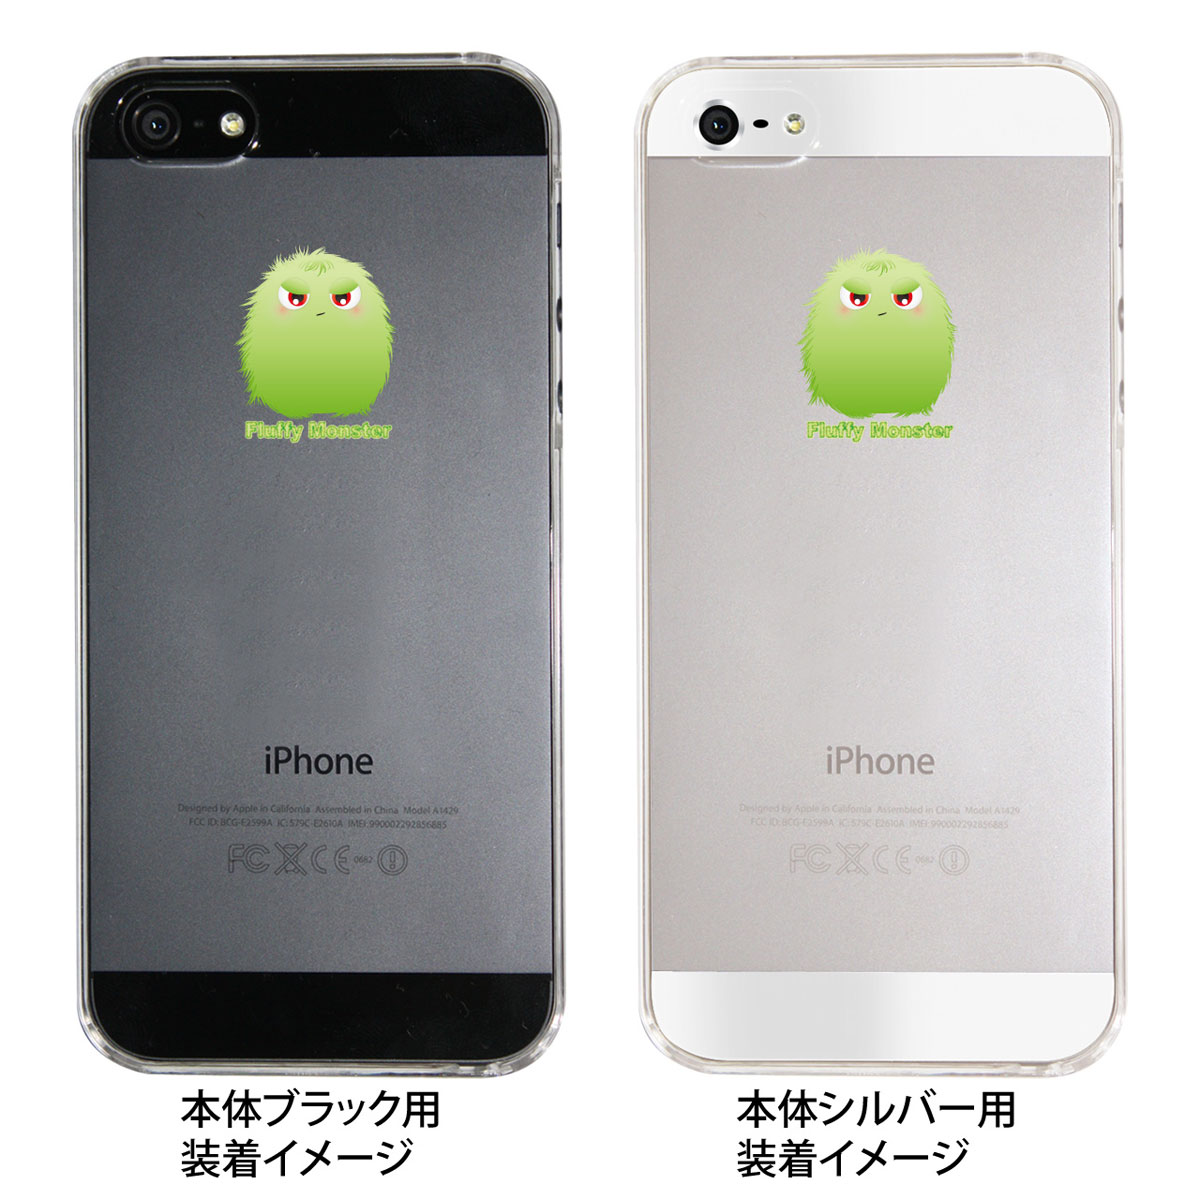 【iPhone5S】【iPhone5】【Fluffy Monster】